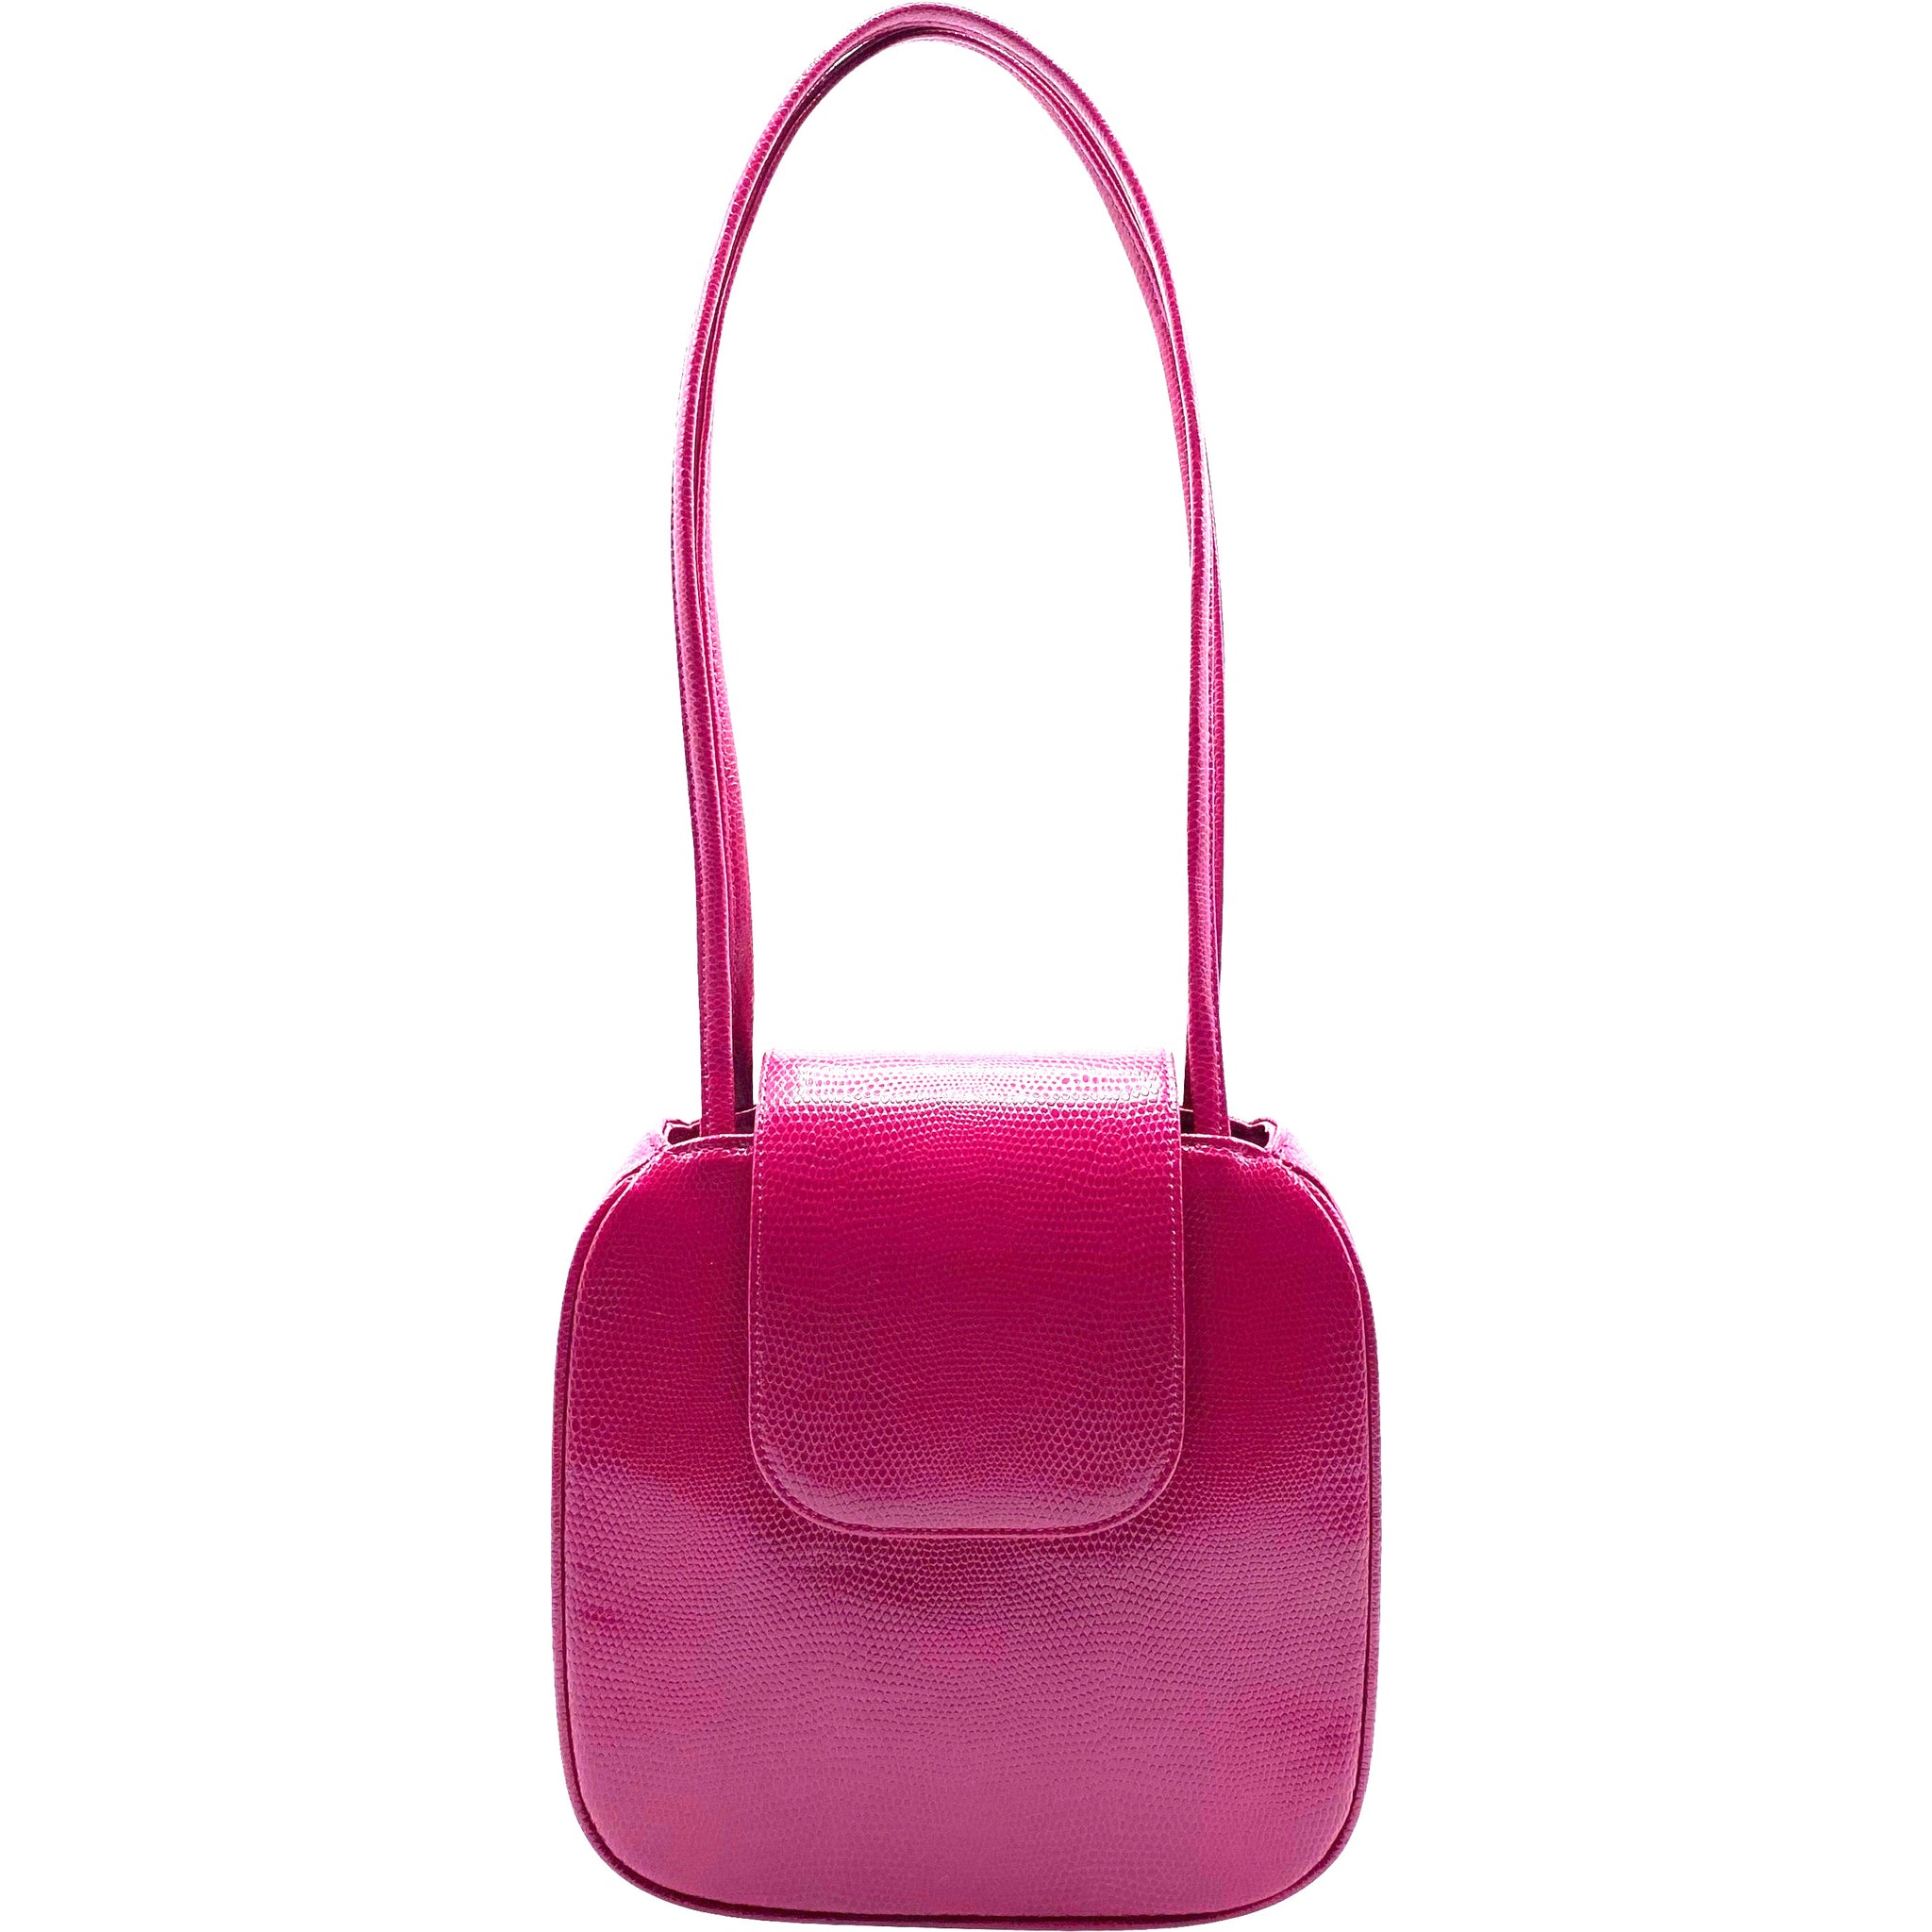 Yoko Tote in Raspberry Faux Lizard - For the Ages